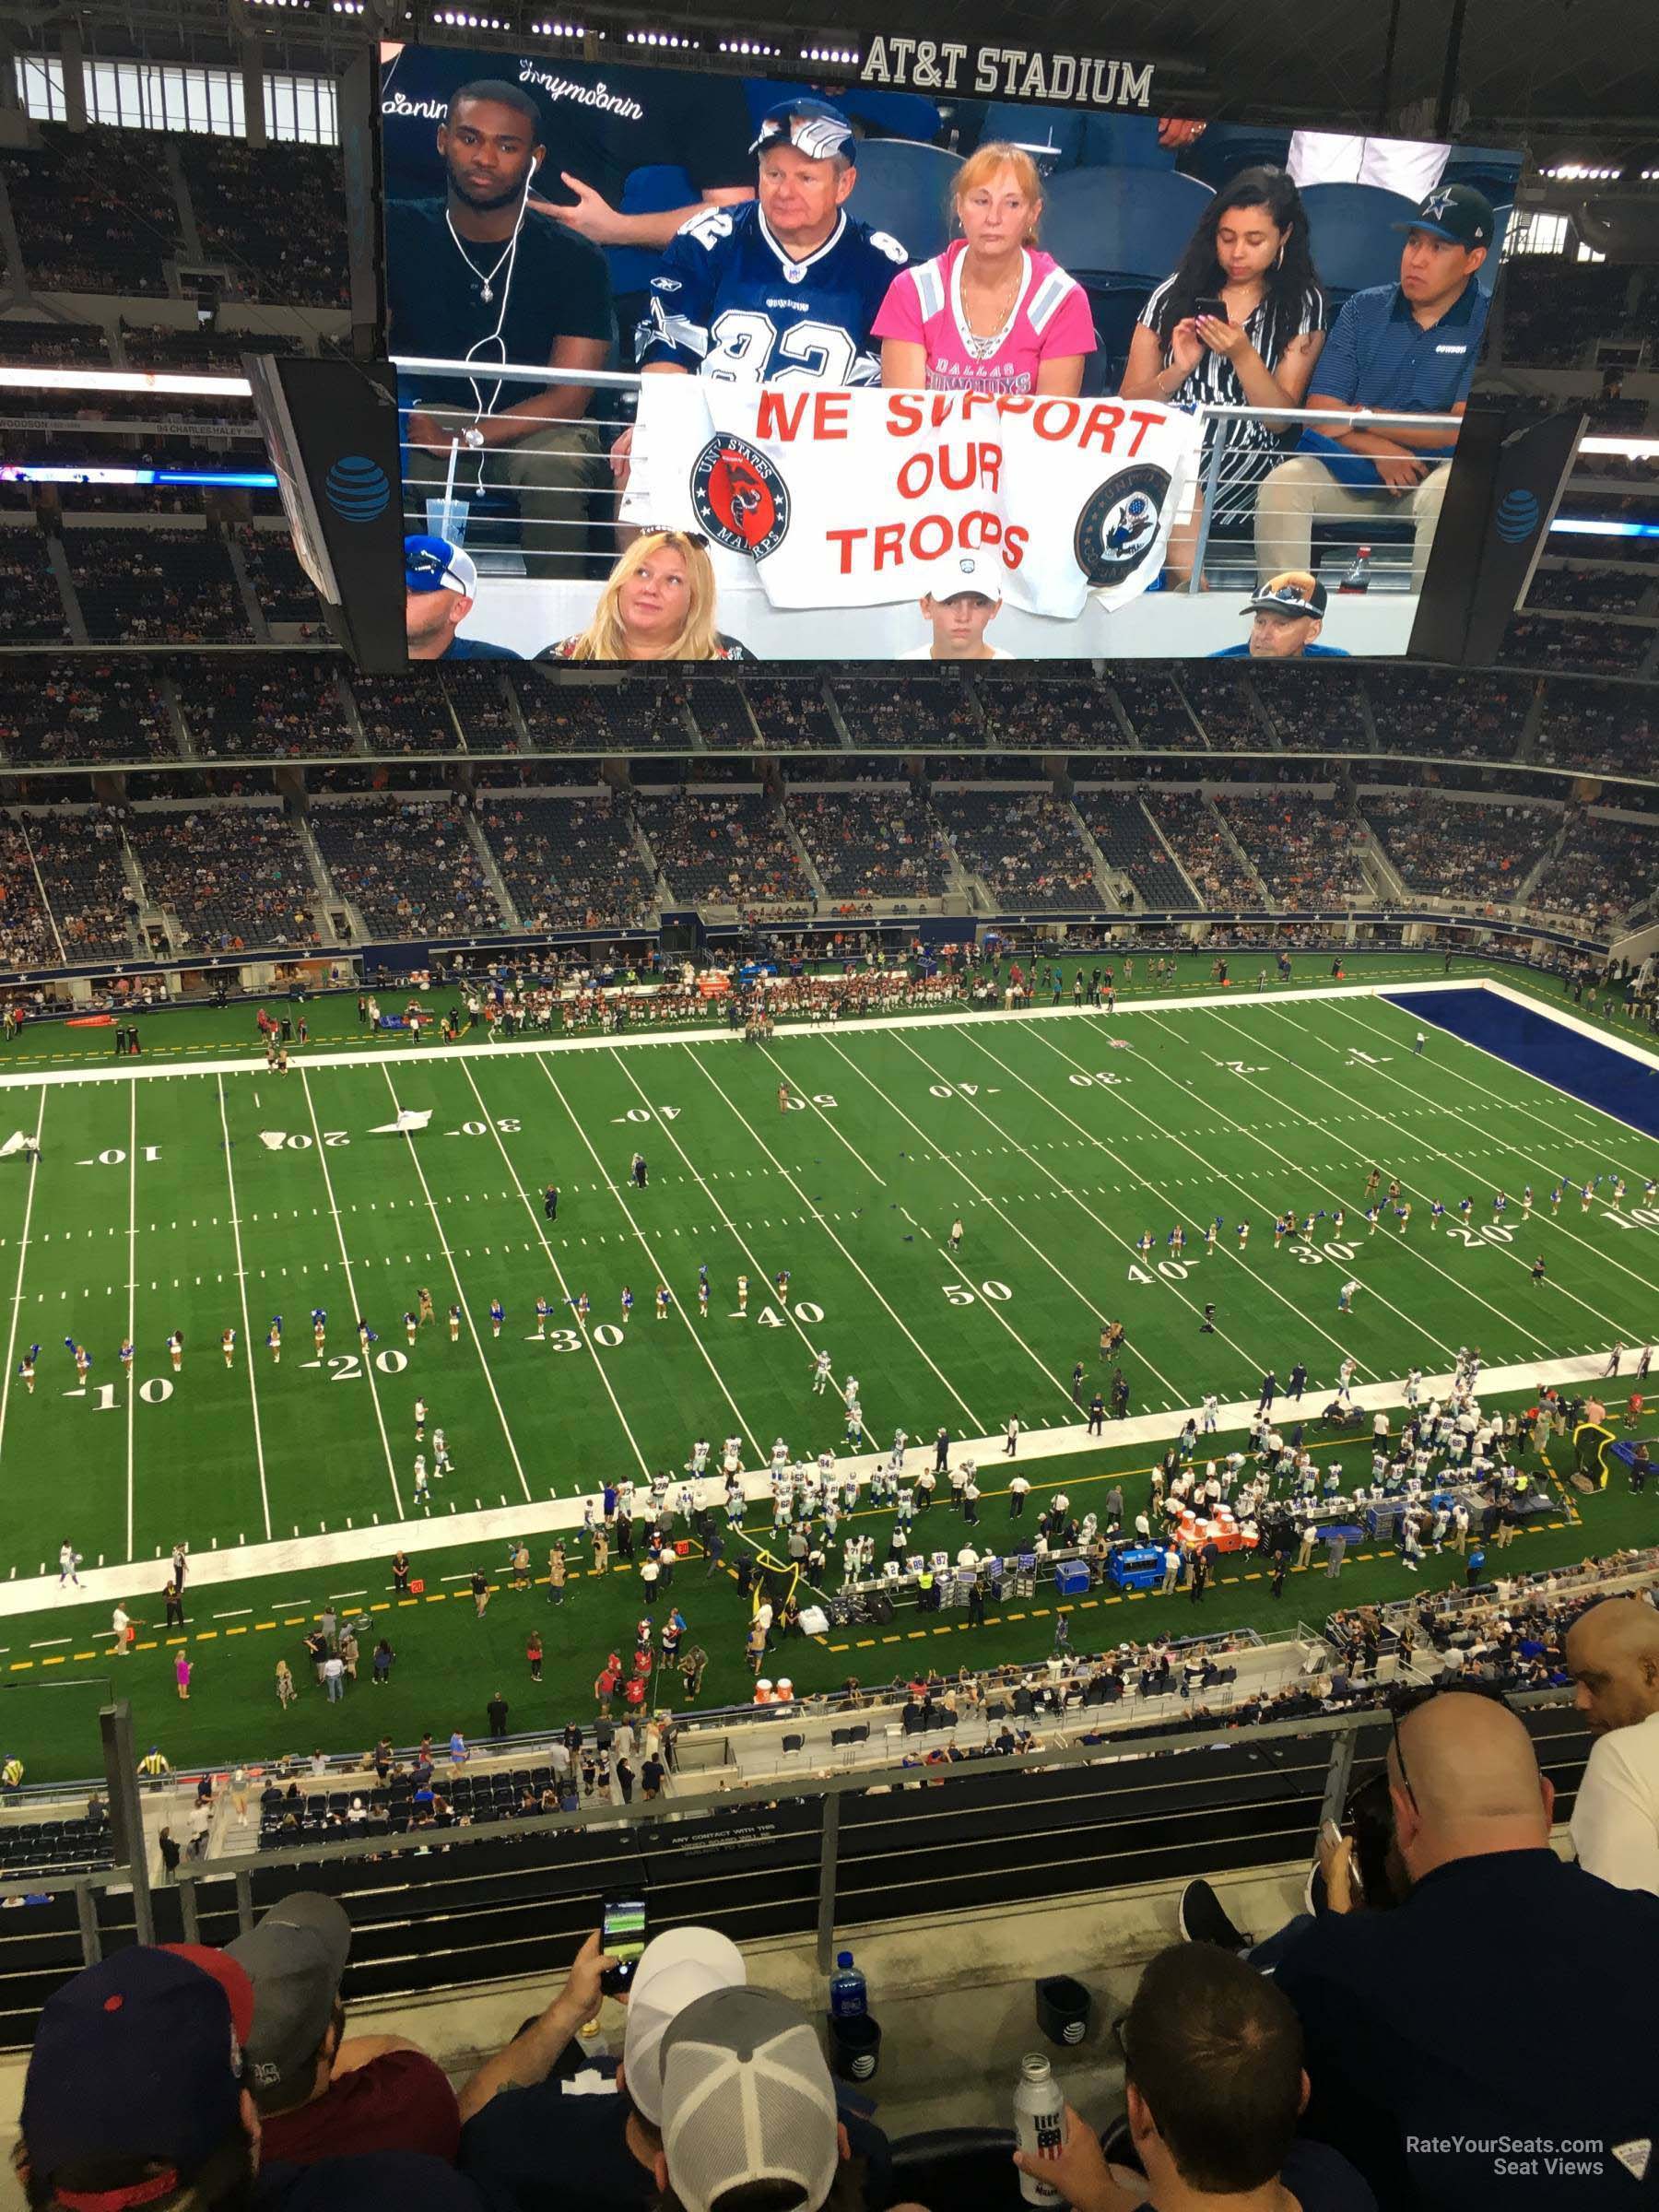 section 415, row 4 seat view  for football - at&t stadium (cowboys stadium)